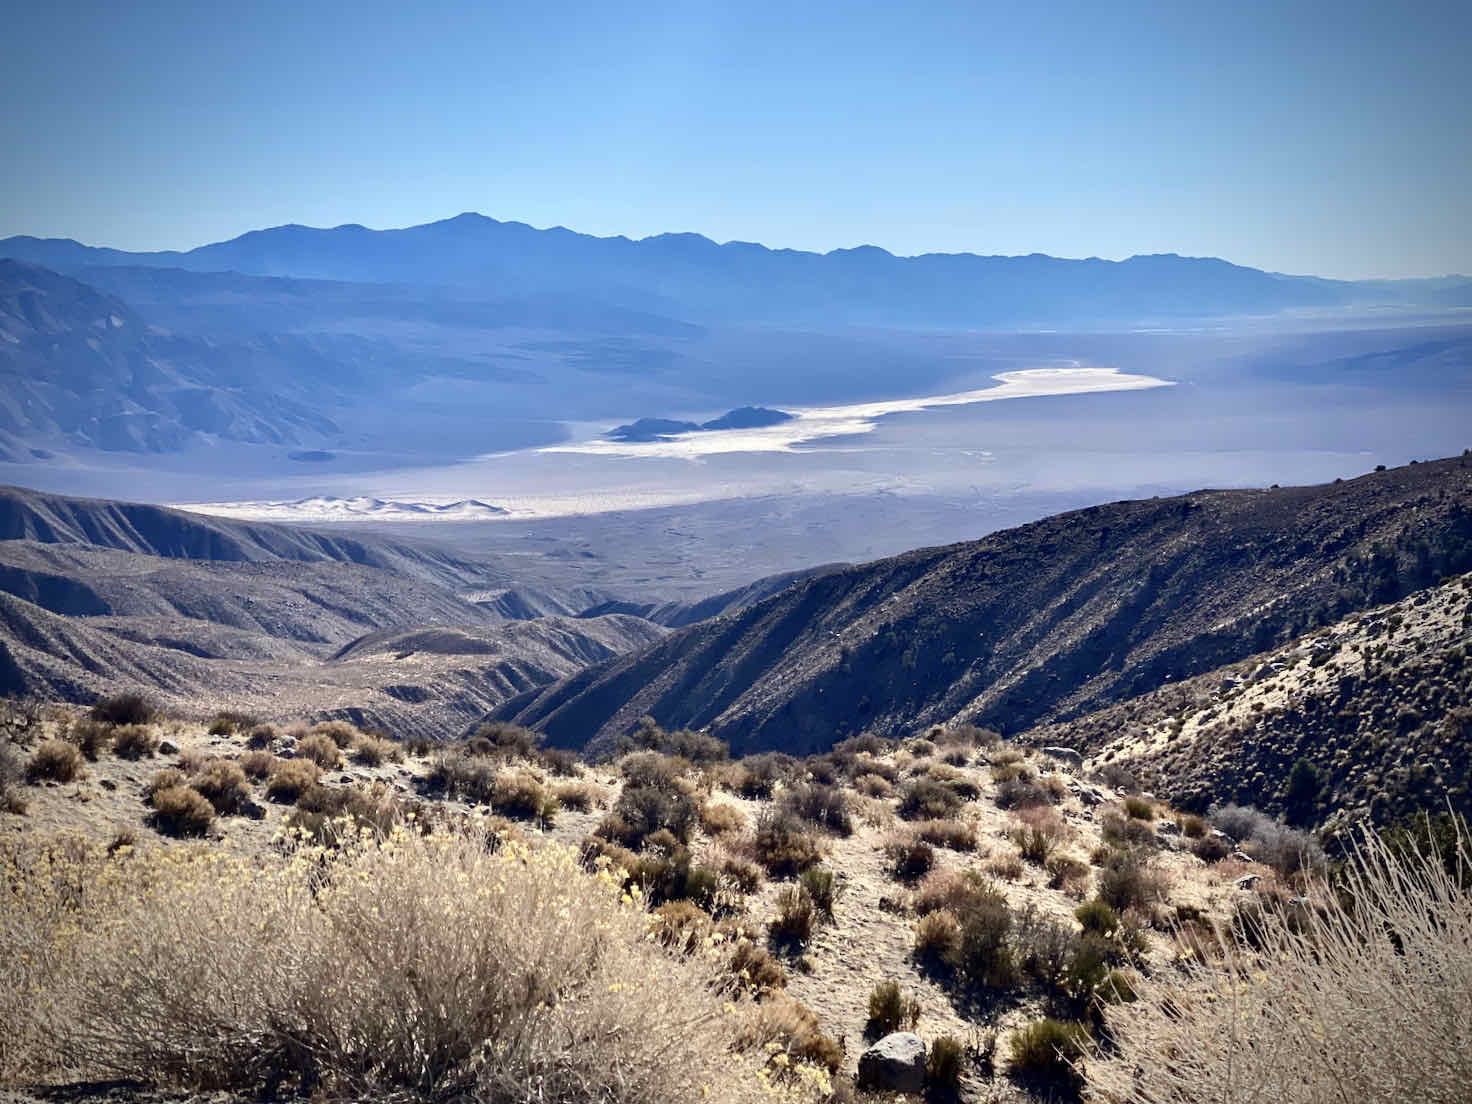 Panamint Valley from dirt road overlook.